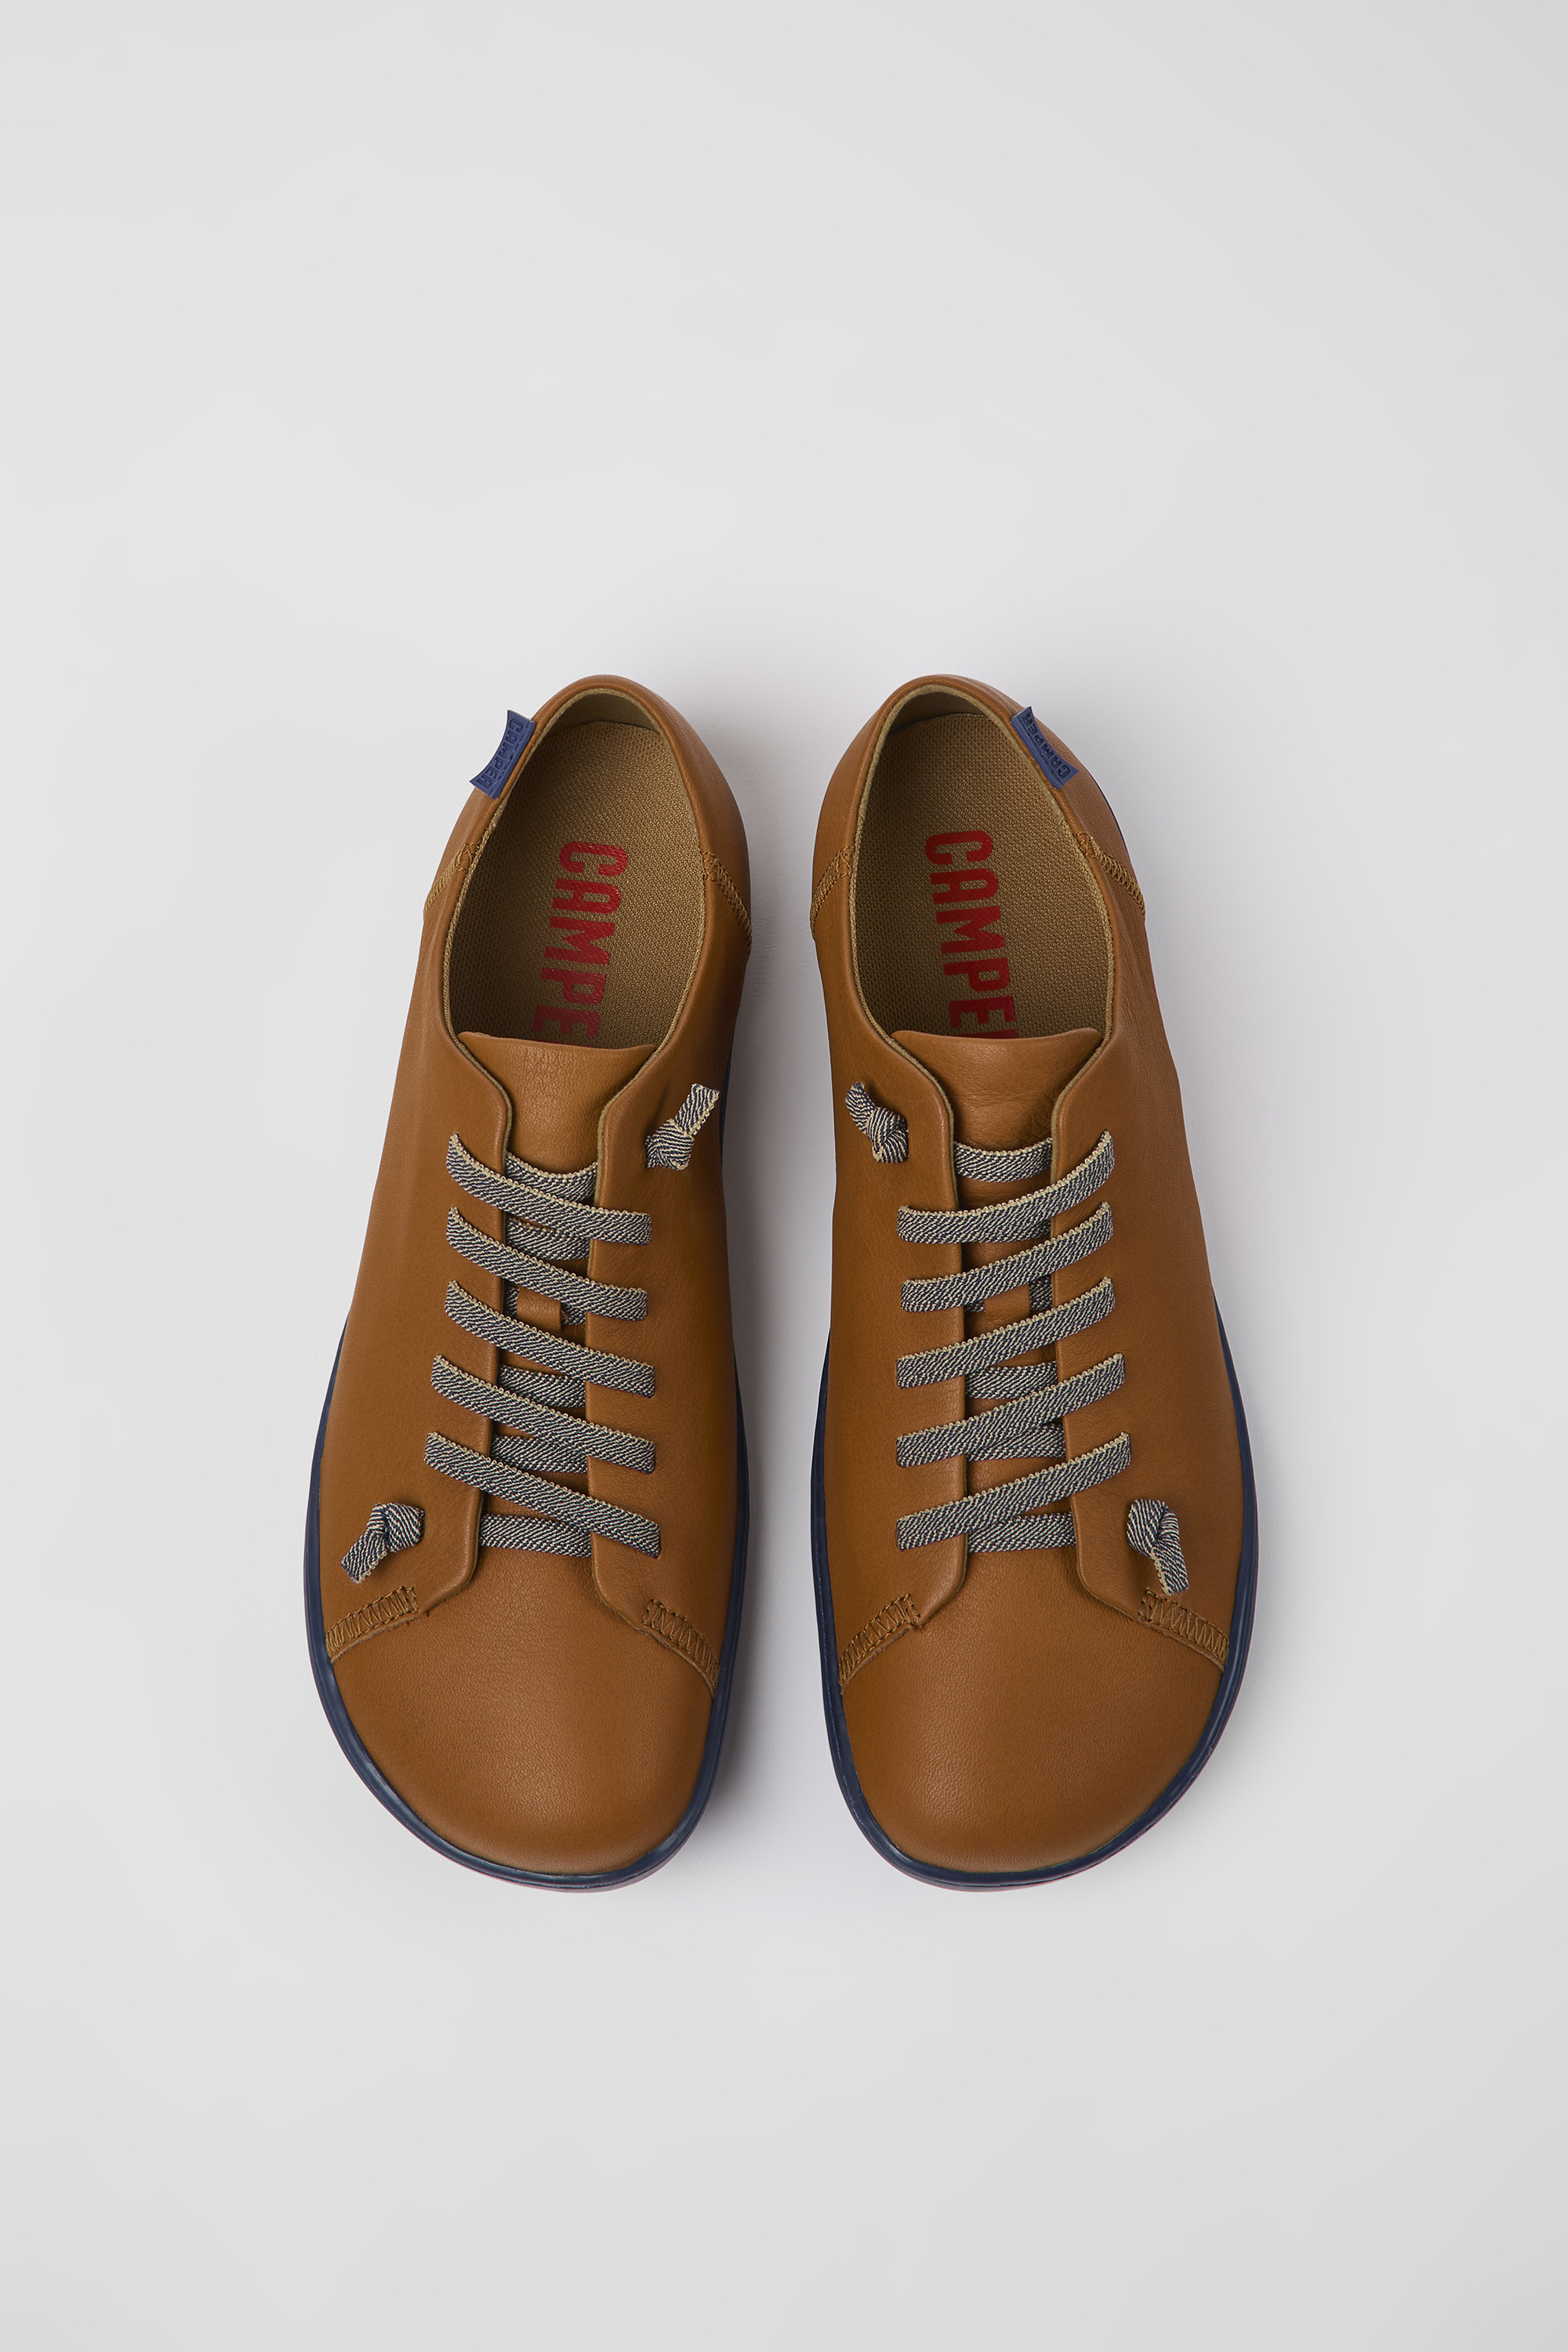 Peu Brown Lace-Up for Men - Fall/Winter collection - Camper USA